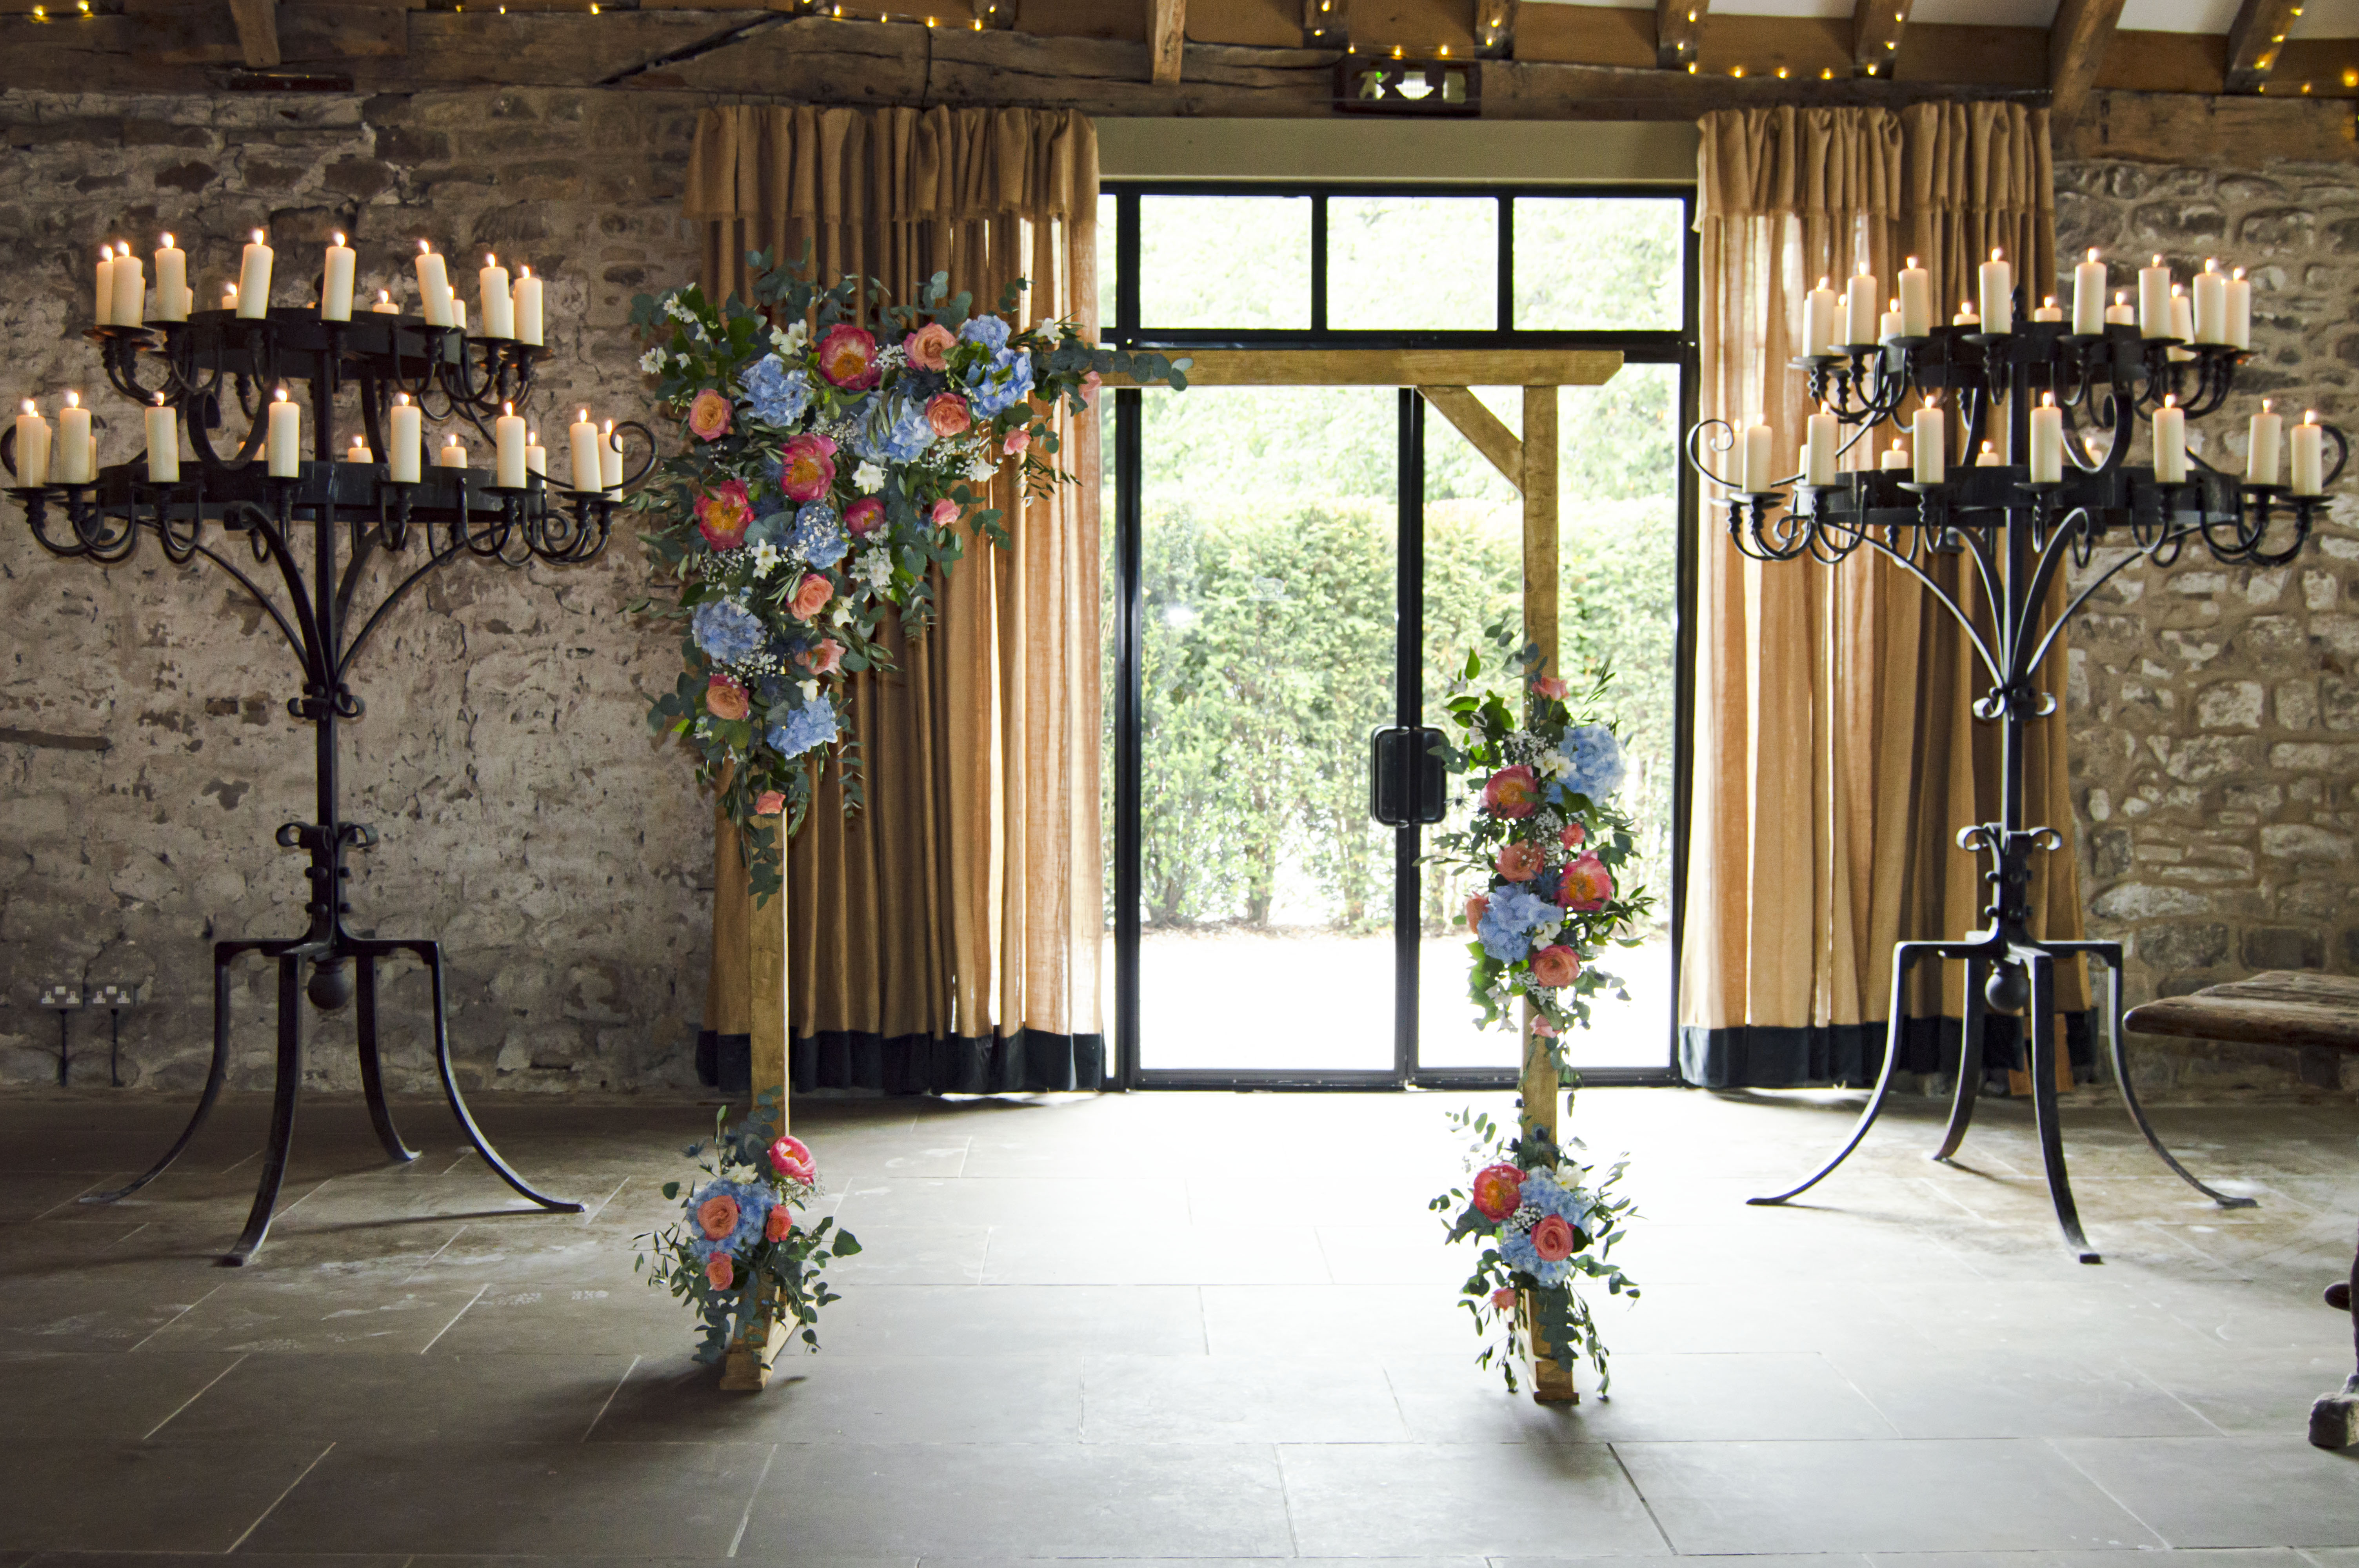 wood-arch-wedding-tithe-barn-blue-coral-ceremony-flowers Grid No Space 5 Columns